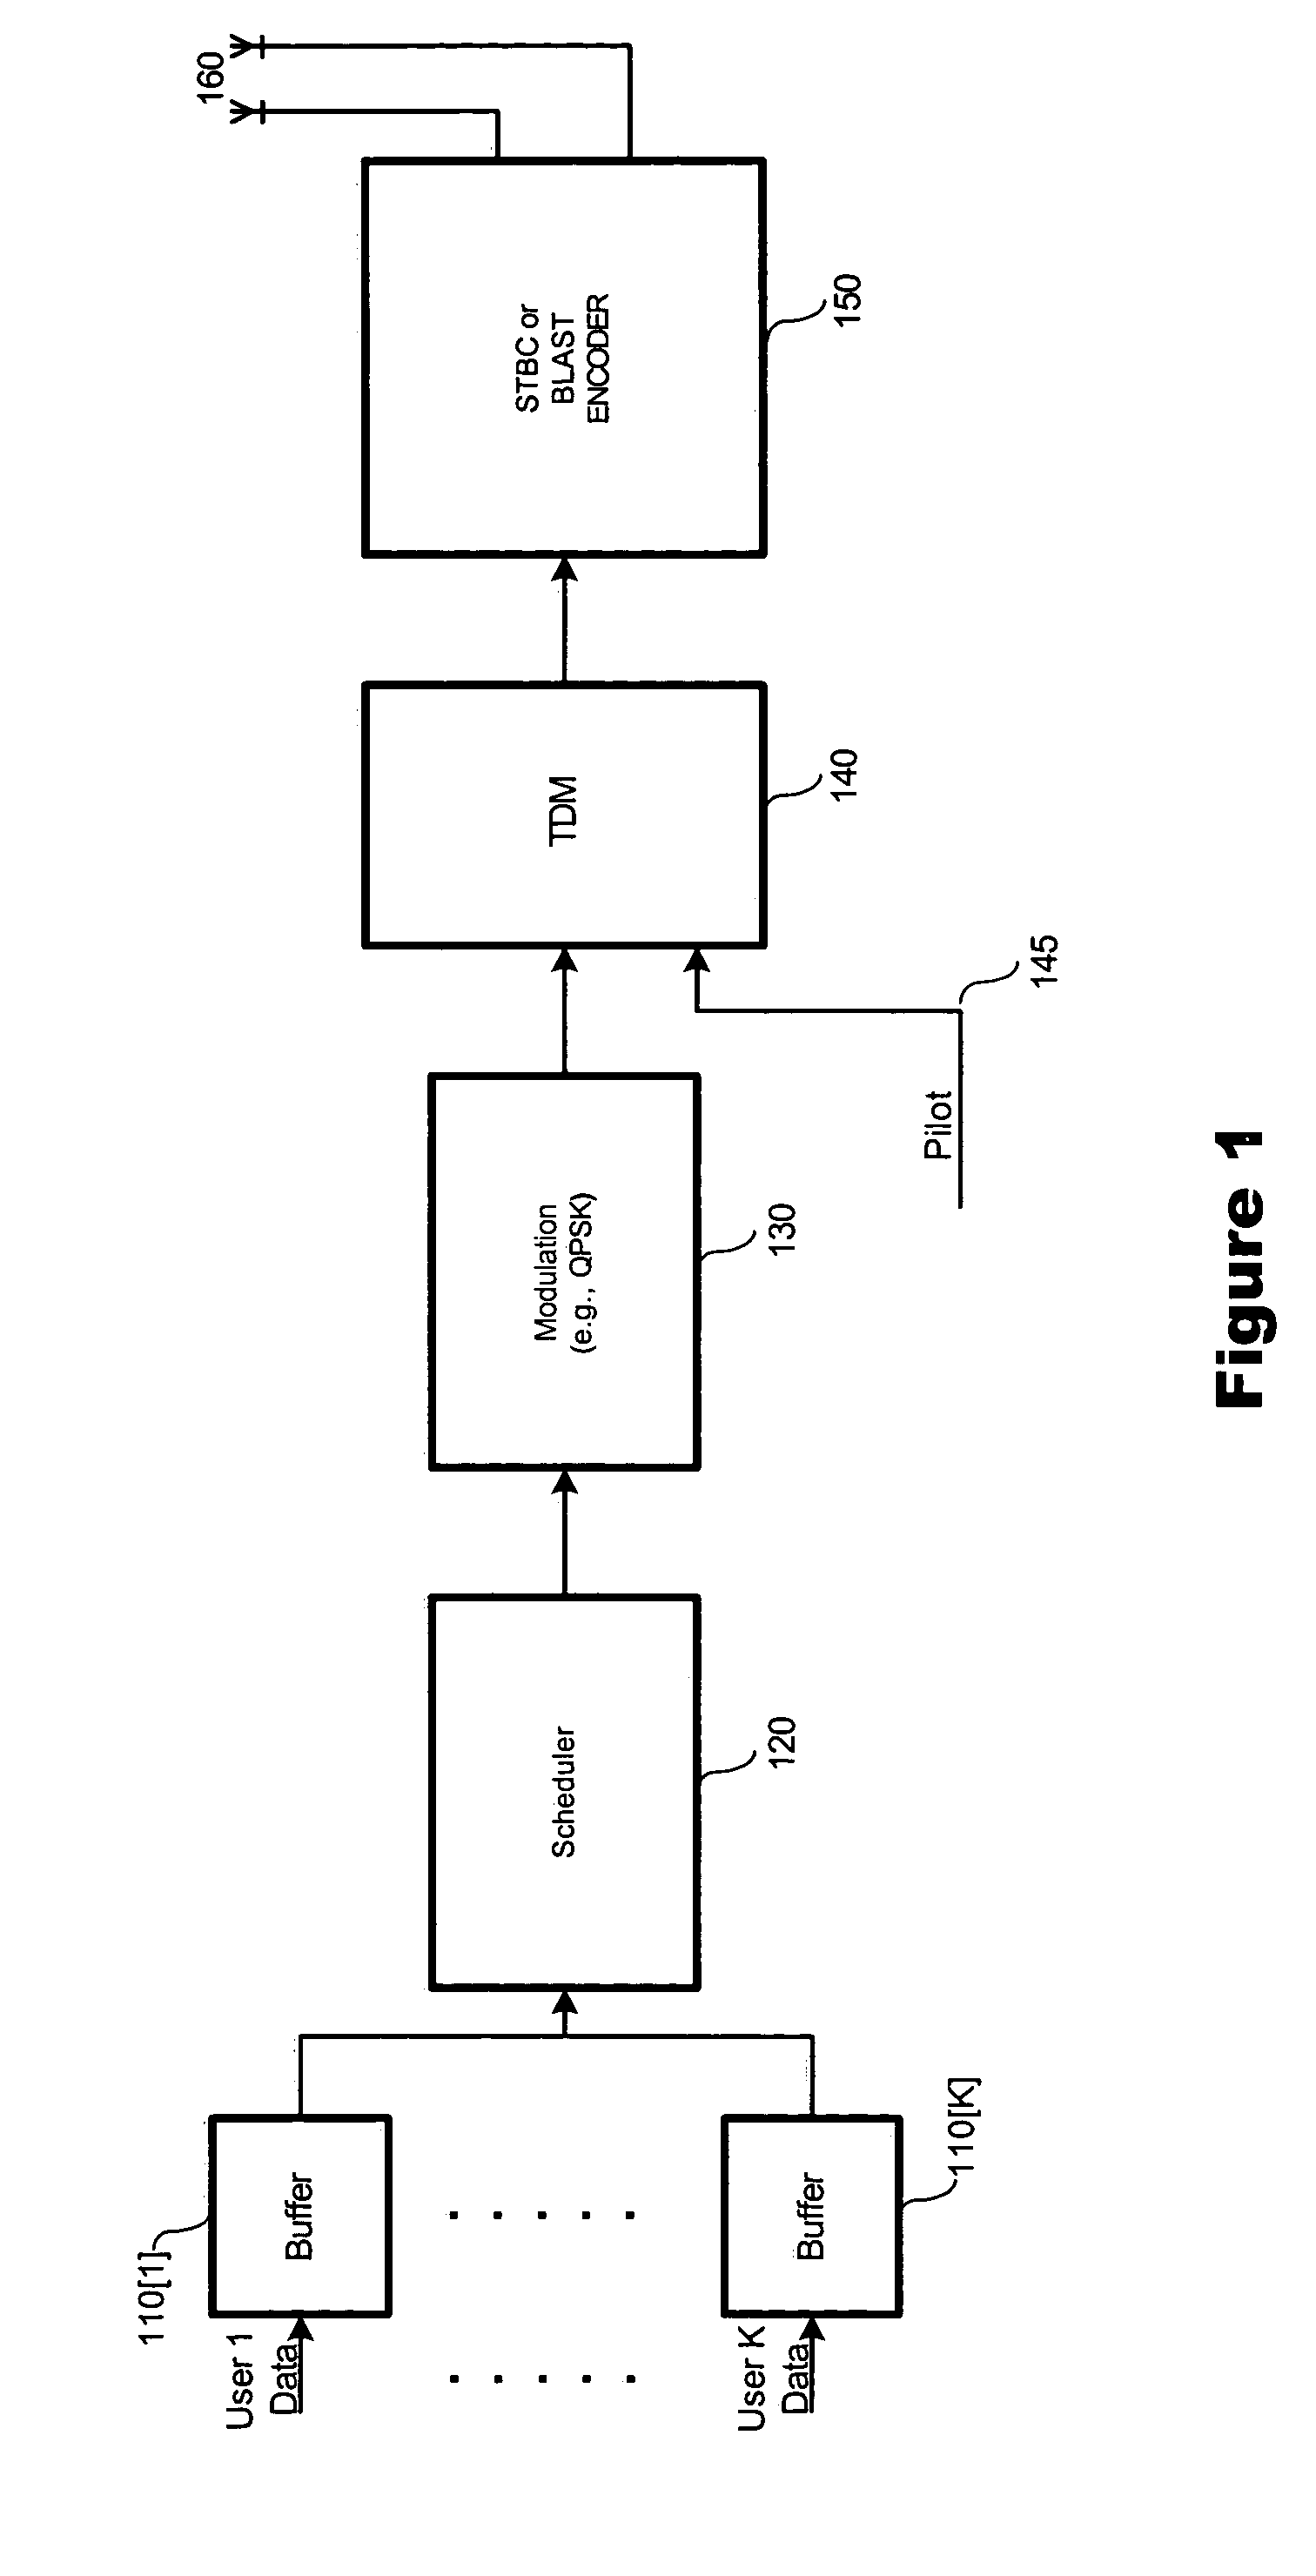 Scheduling method with tunable throughput maximization and fairness guarantees in resource allocation